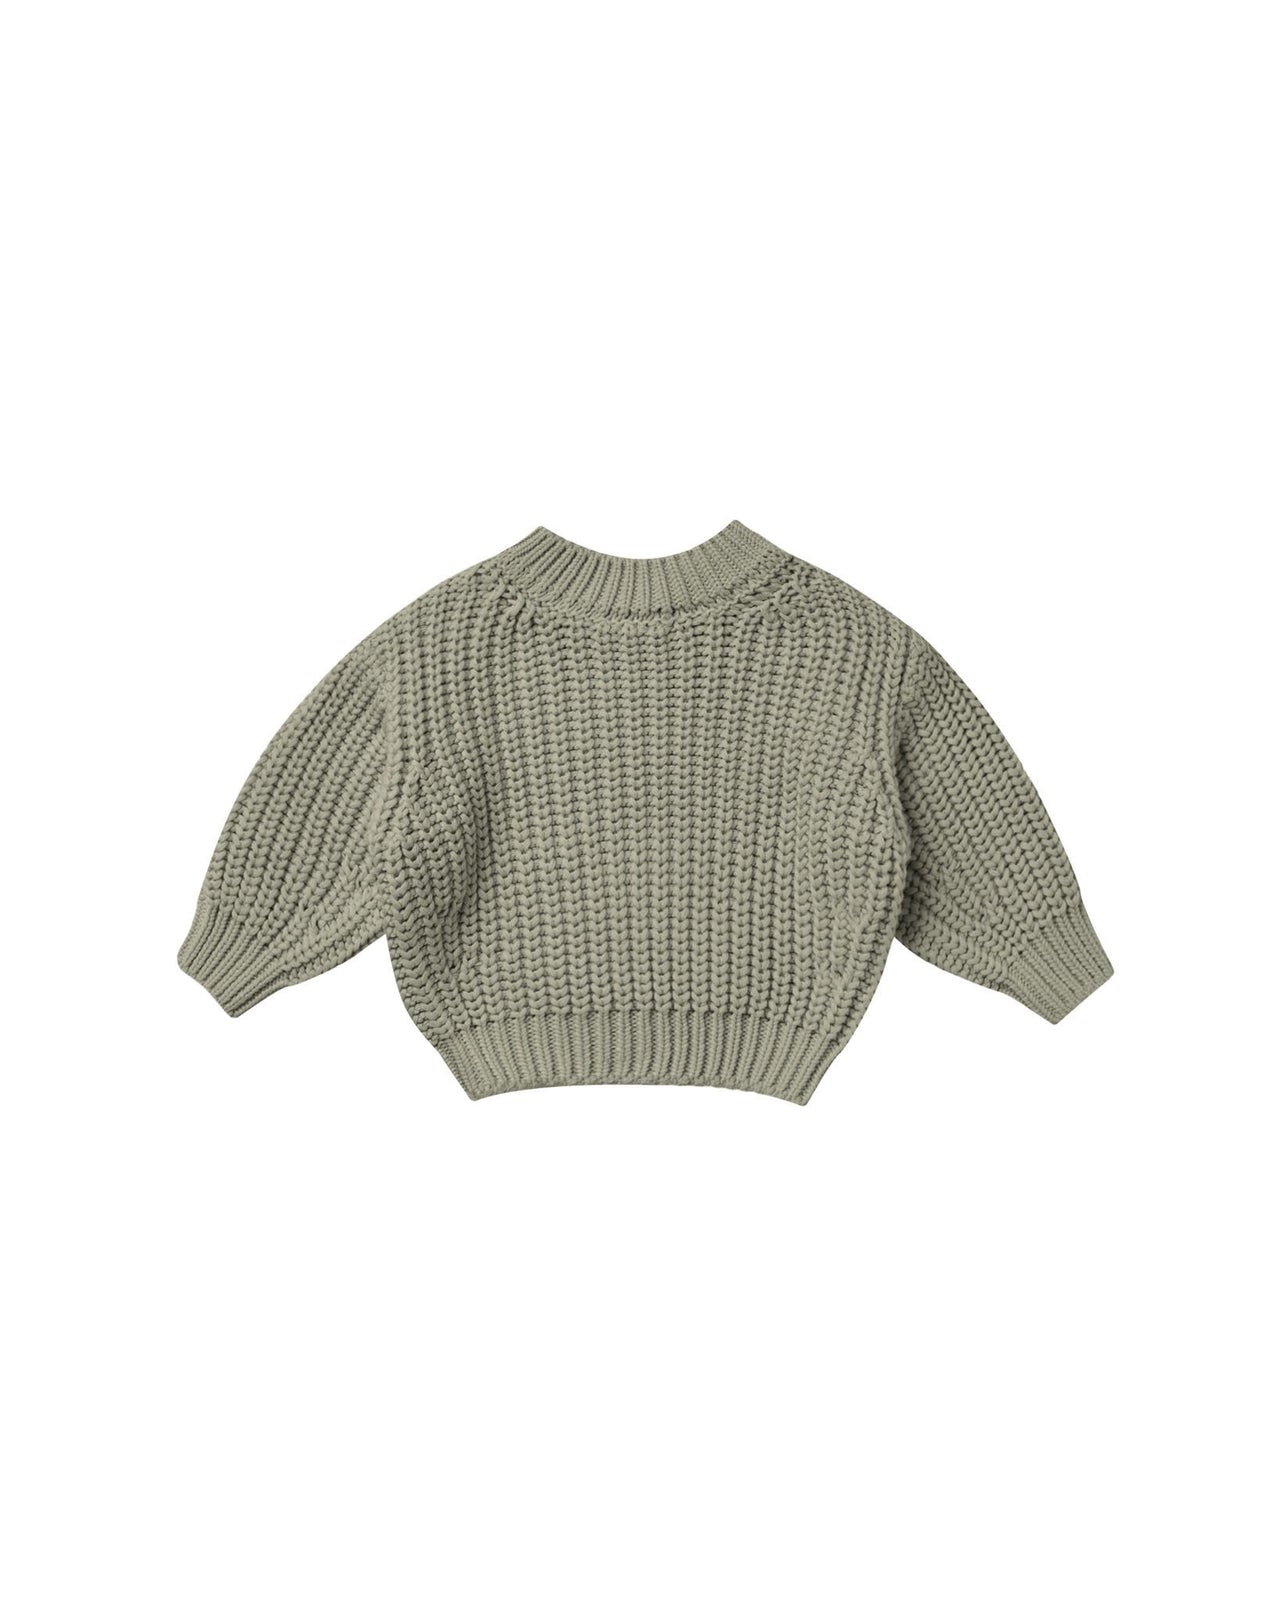 Quincy Mae Chunky Knit Sweater, Basil